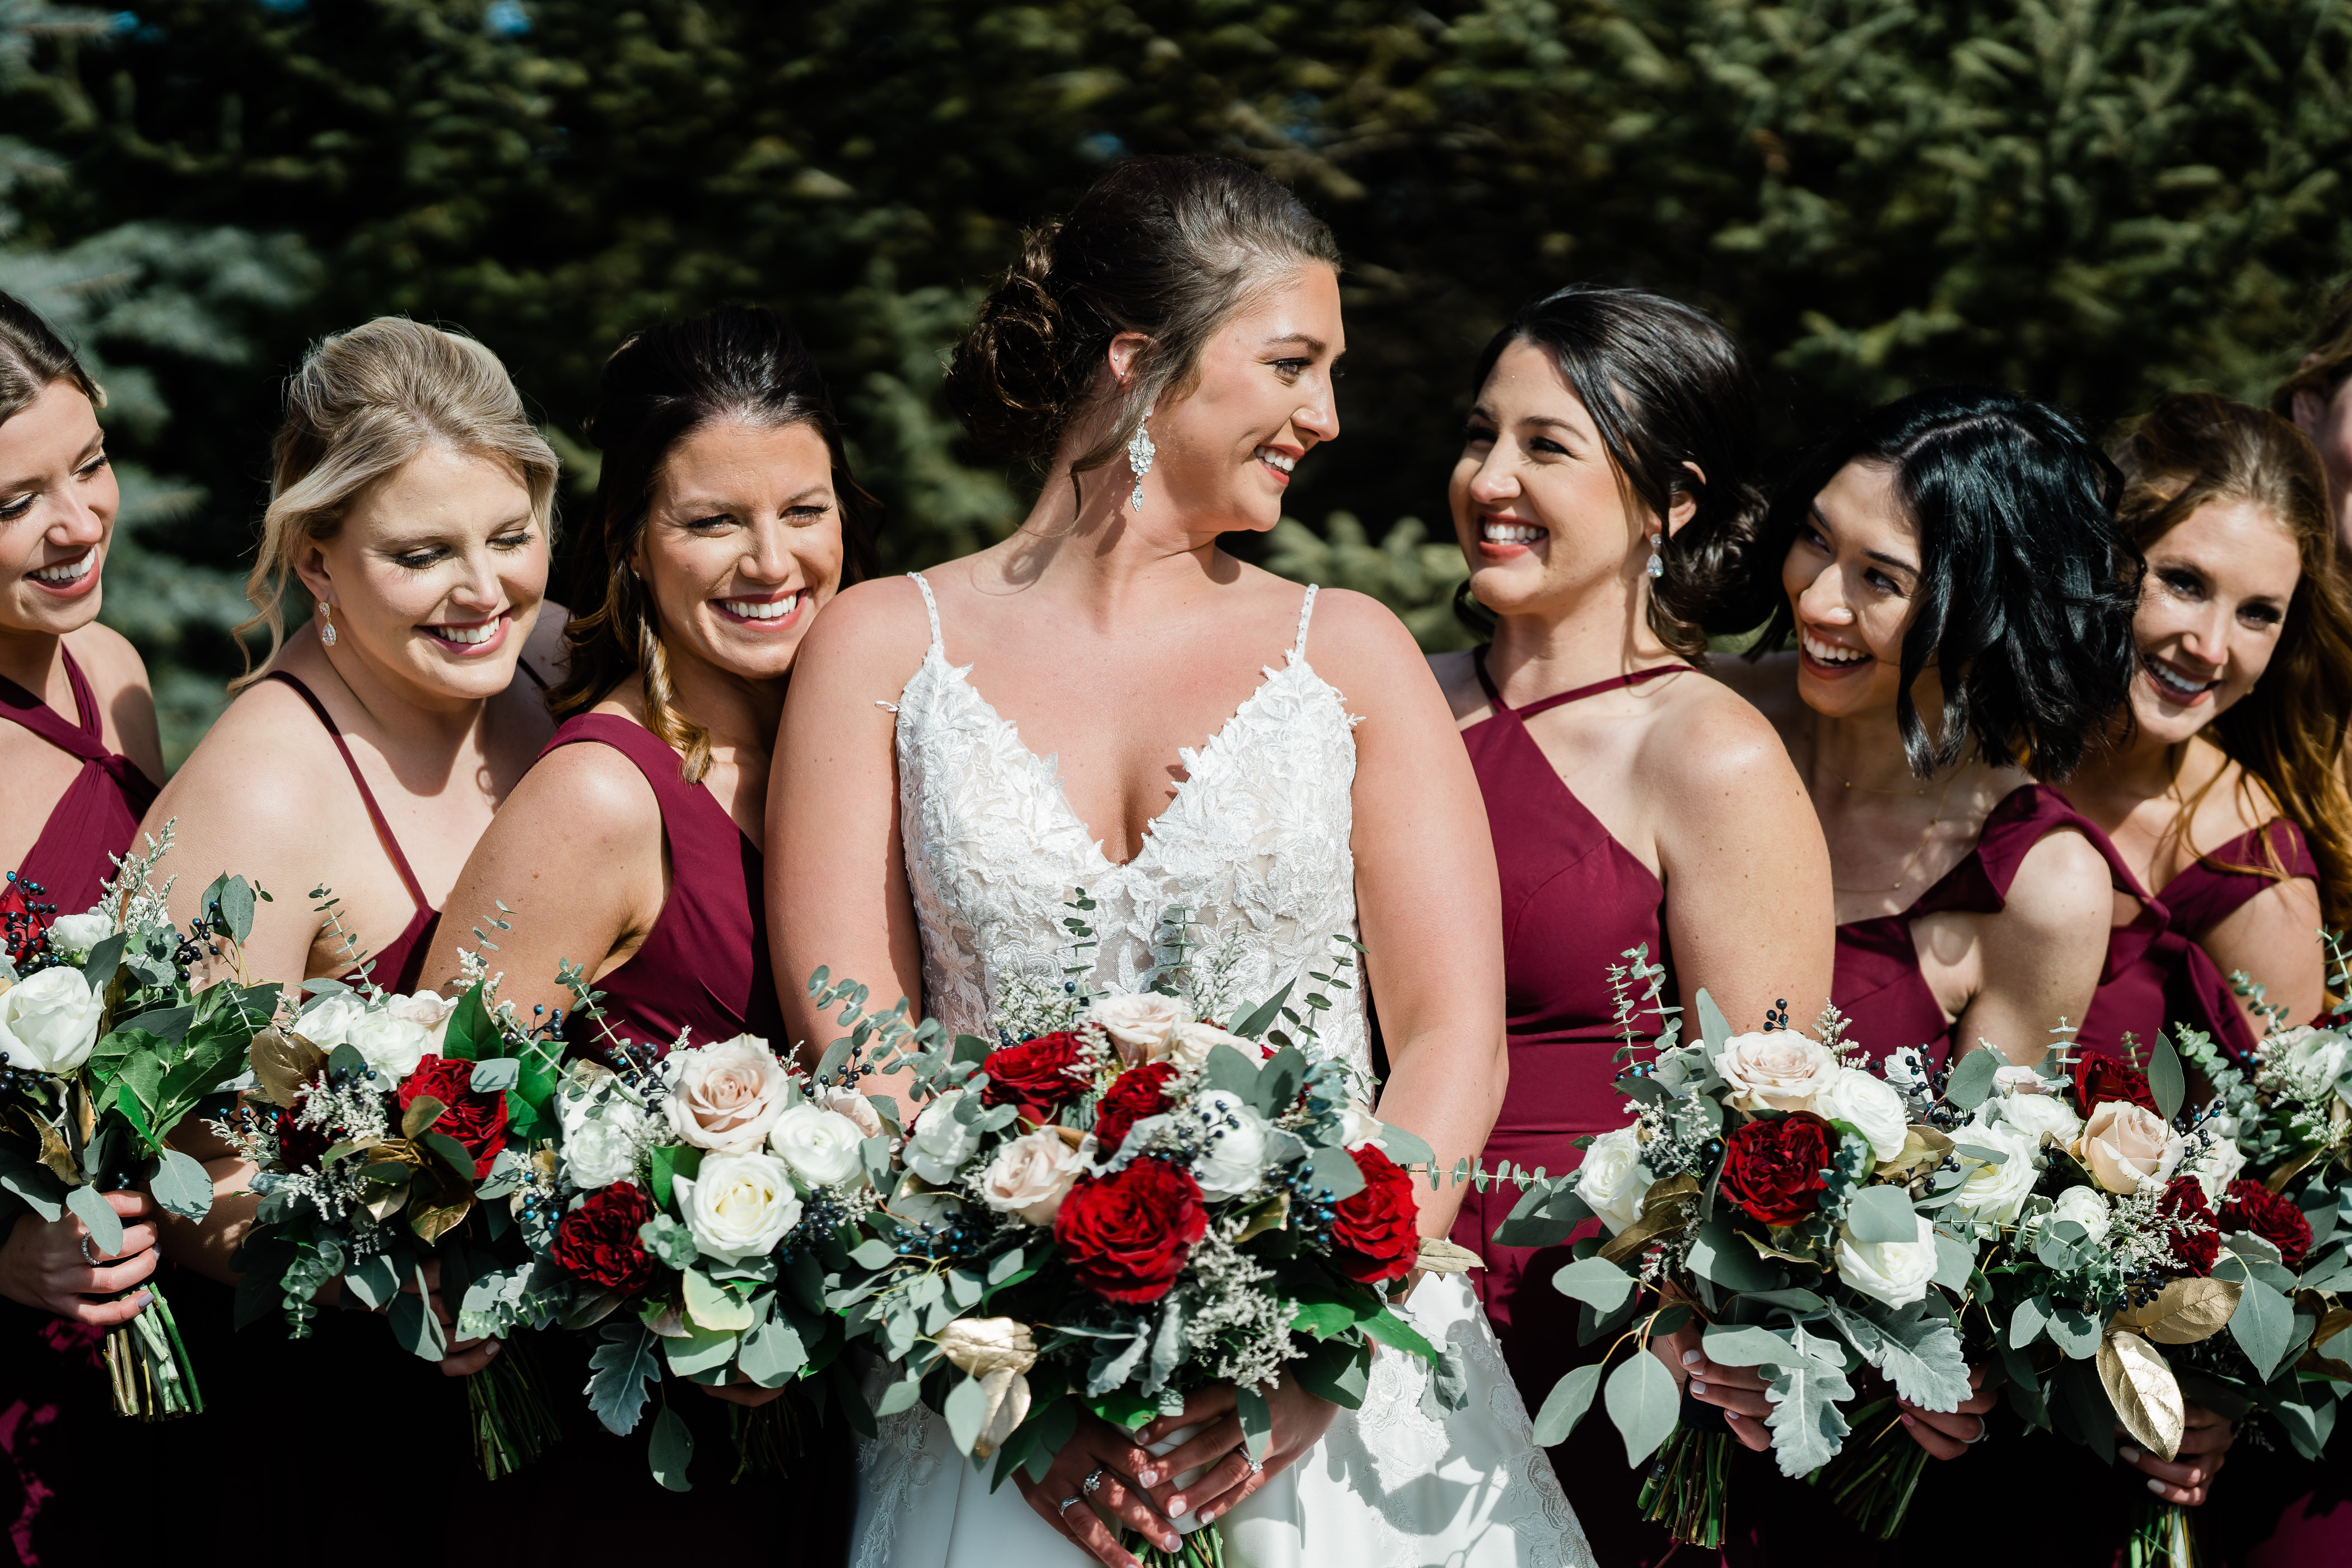 winter bride standing with her bridesmaids who are in burgundy gown holding white and red rose wedding bouquets